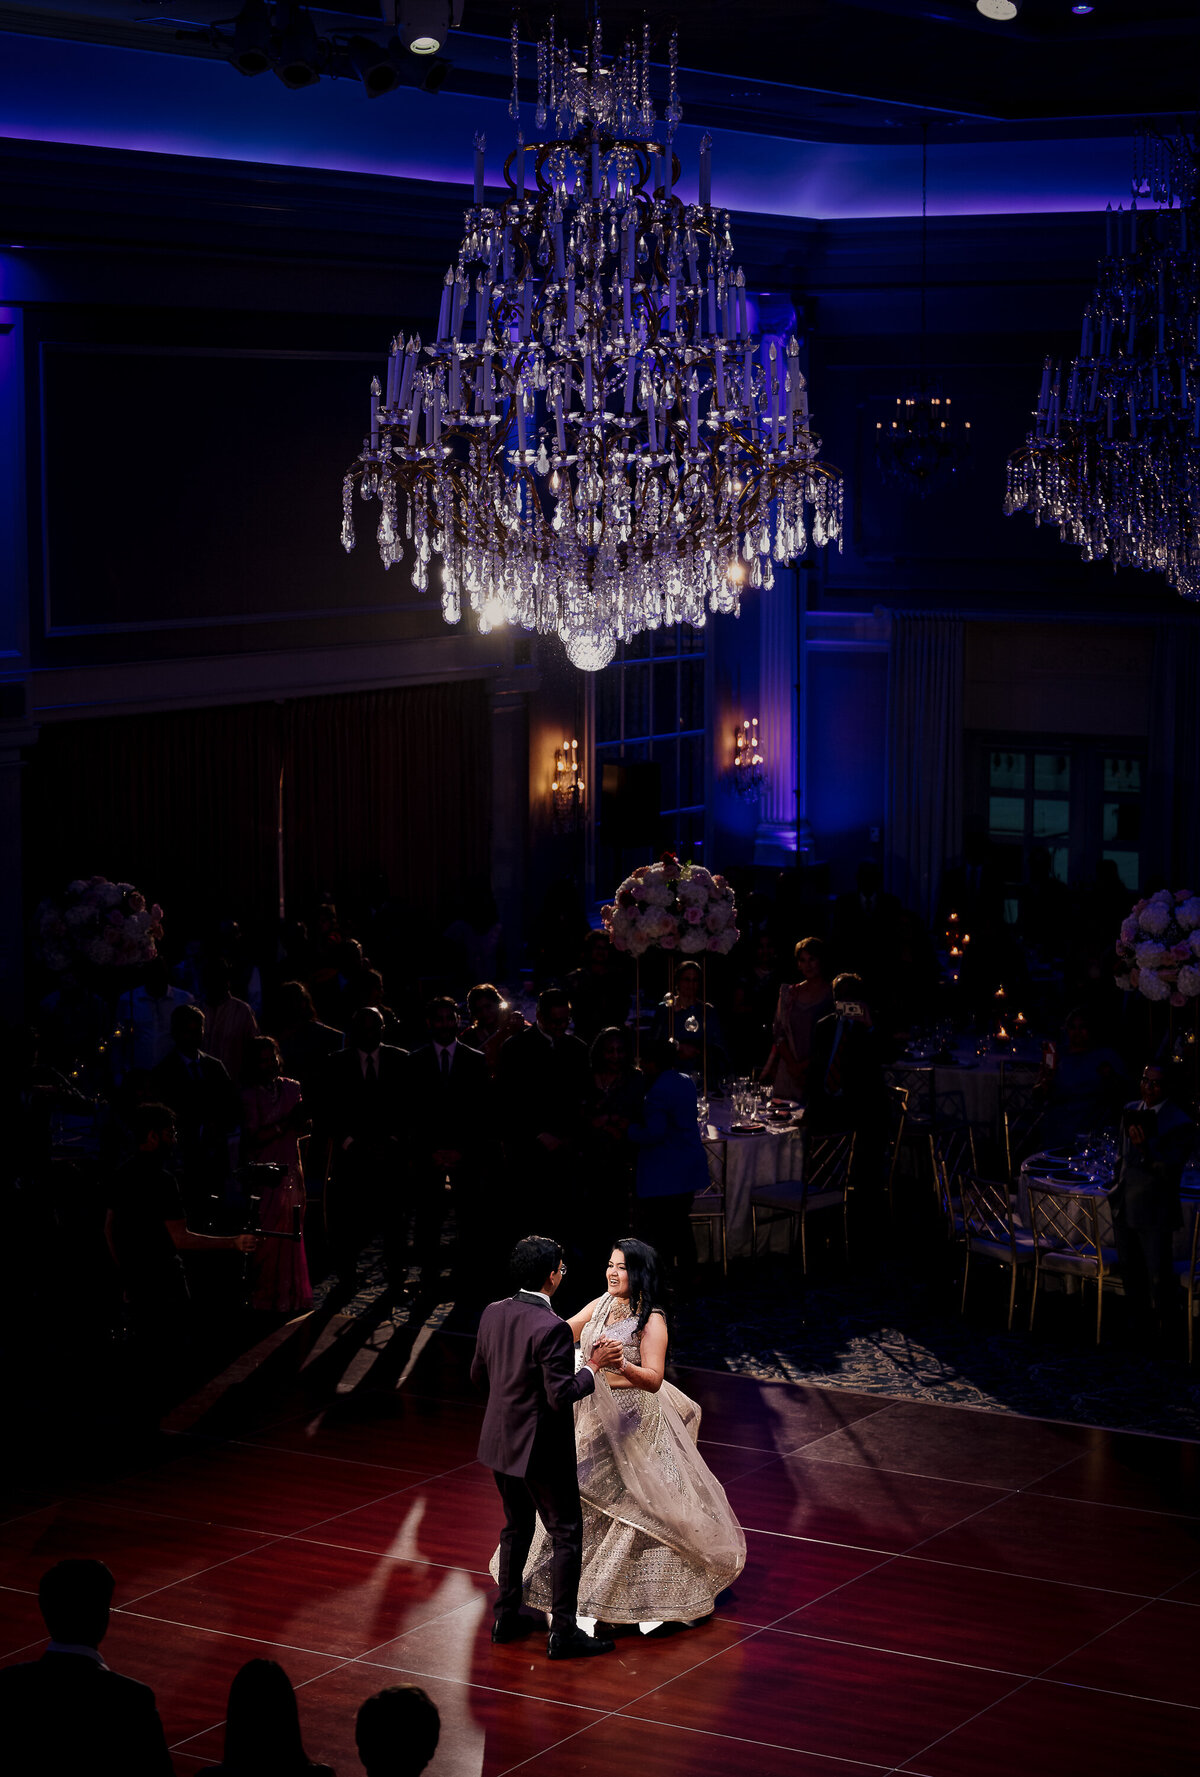 Stunning Indian wedding photography by Ishan Fotografi at The Palace in Somerset, NJ.